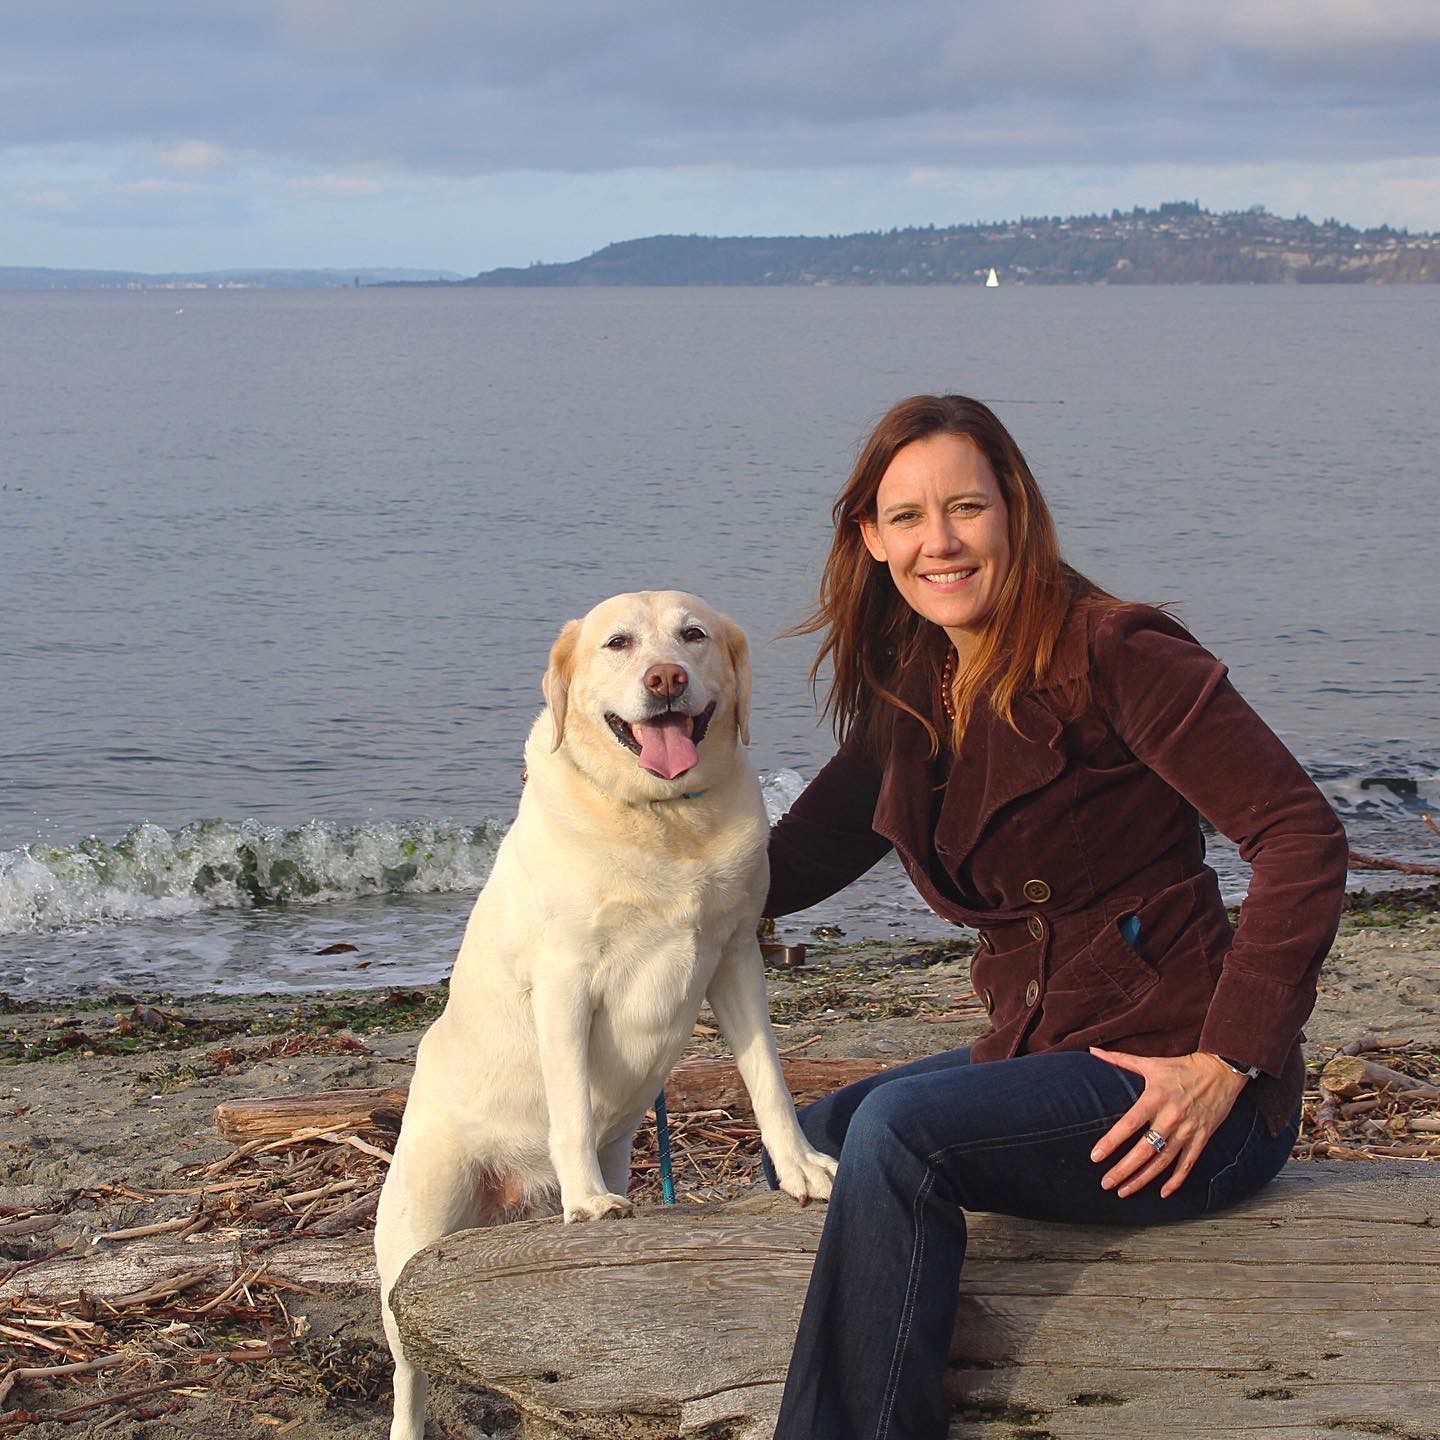 Sadie, a lab, and Taeya Lauer, her owner, on the beach at Alki